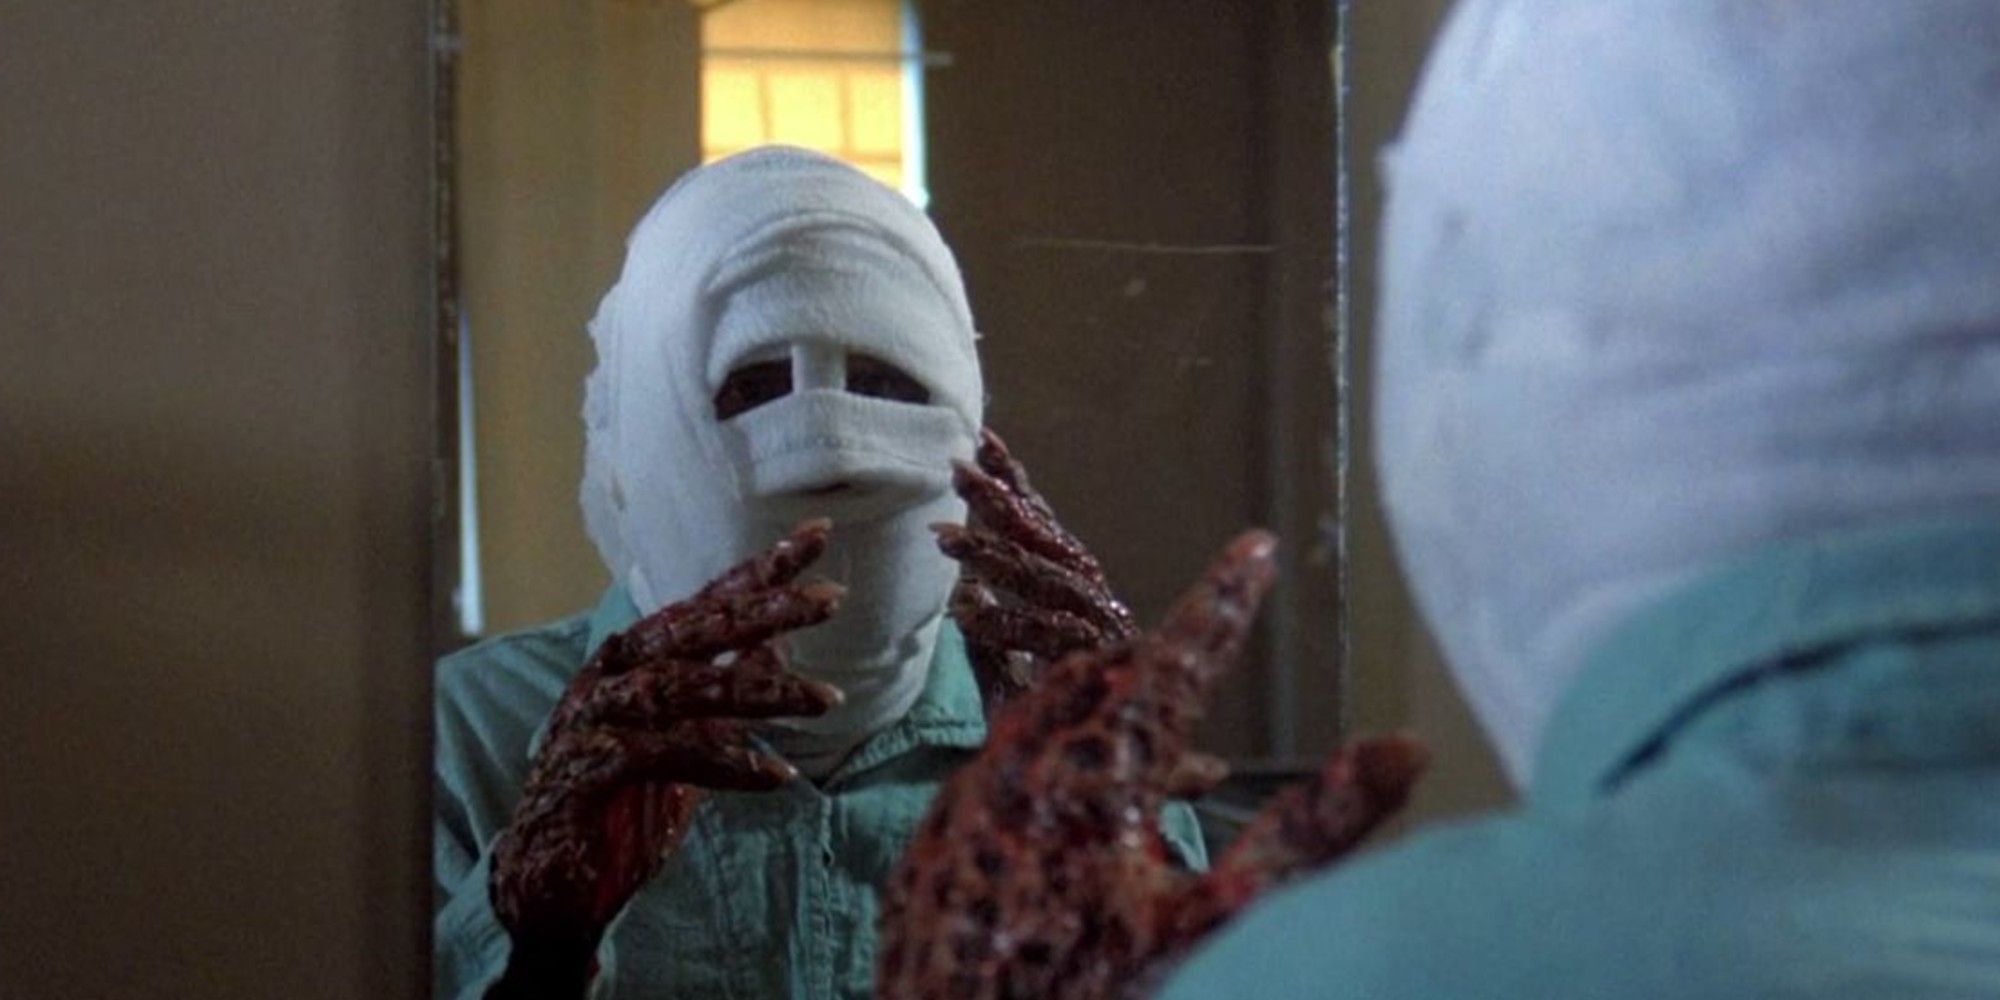 A man with a bandaged face stares at himself in the mirror, a still from The Incredible Melting Man